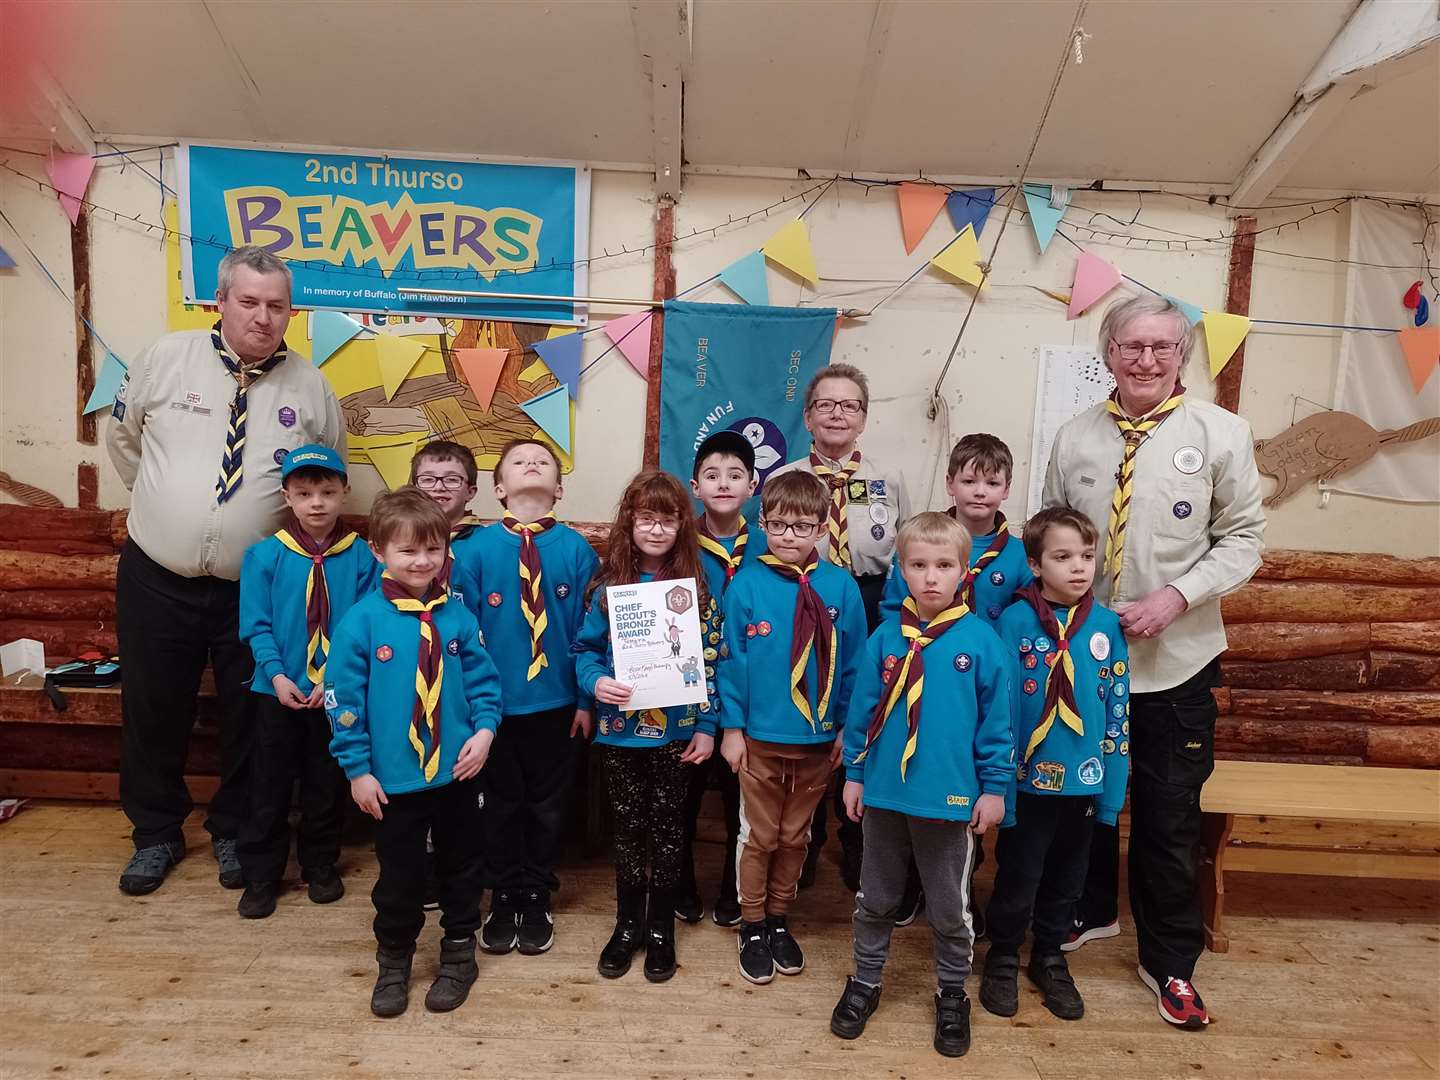 Tamara Moar (centre) received her Chief Scouts Bronze Award from Gary Stronach (left) with 2nd Thurso Beaver leaders Sandra Carson and Ian Pearson.